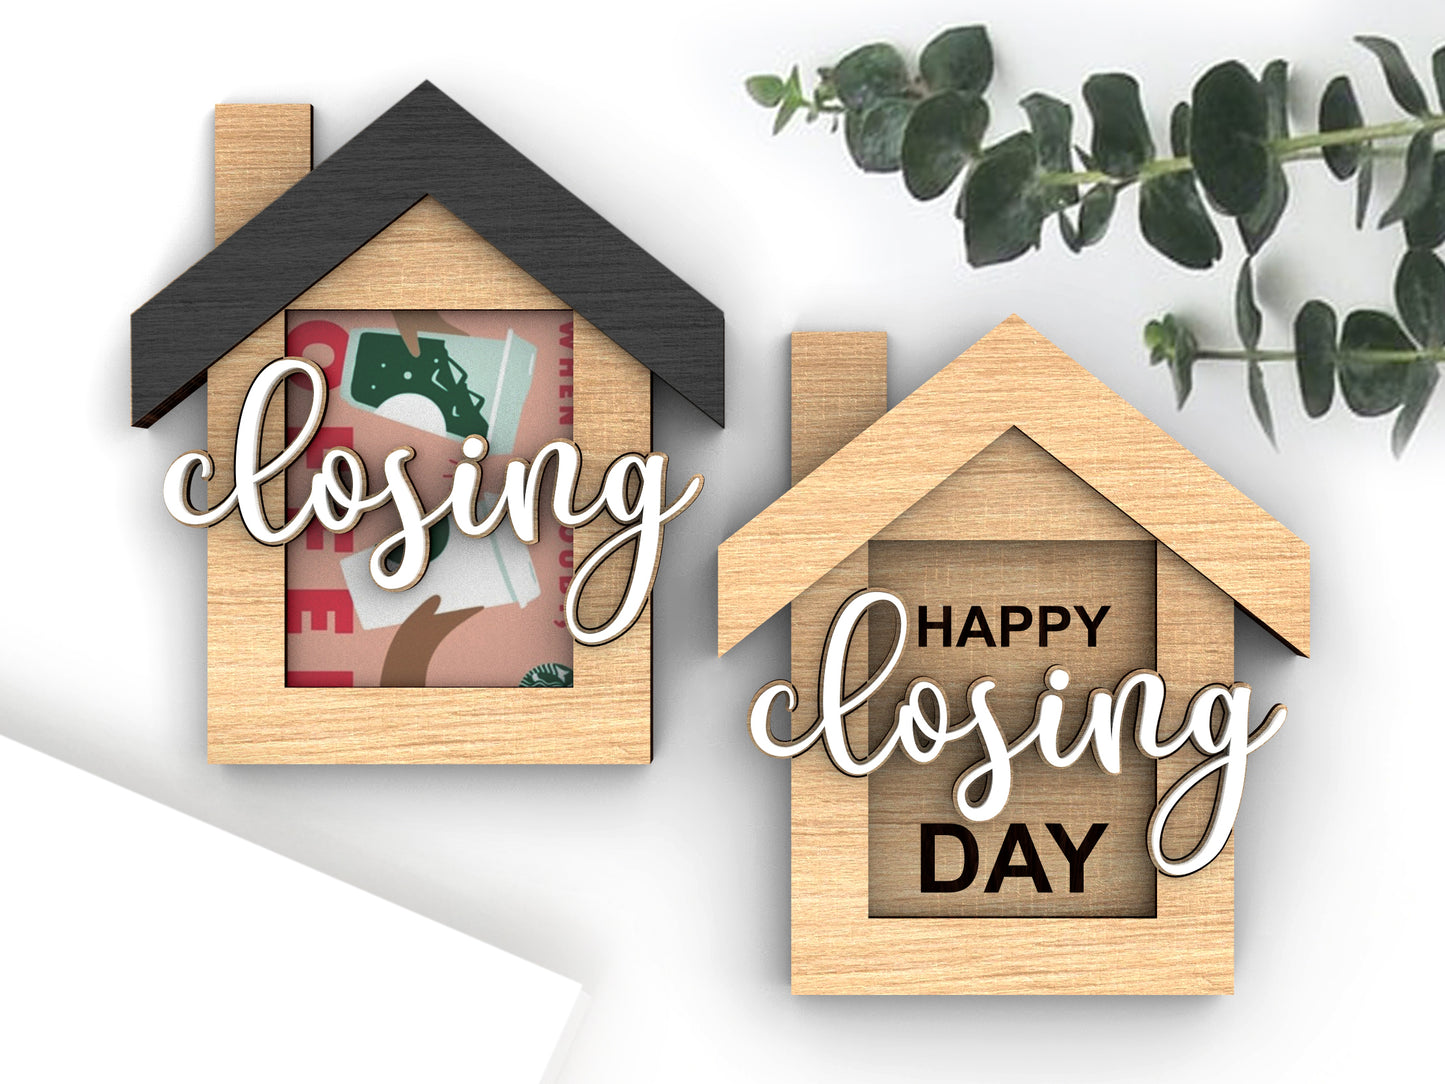 Happy Closing Day Gift Card Holder